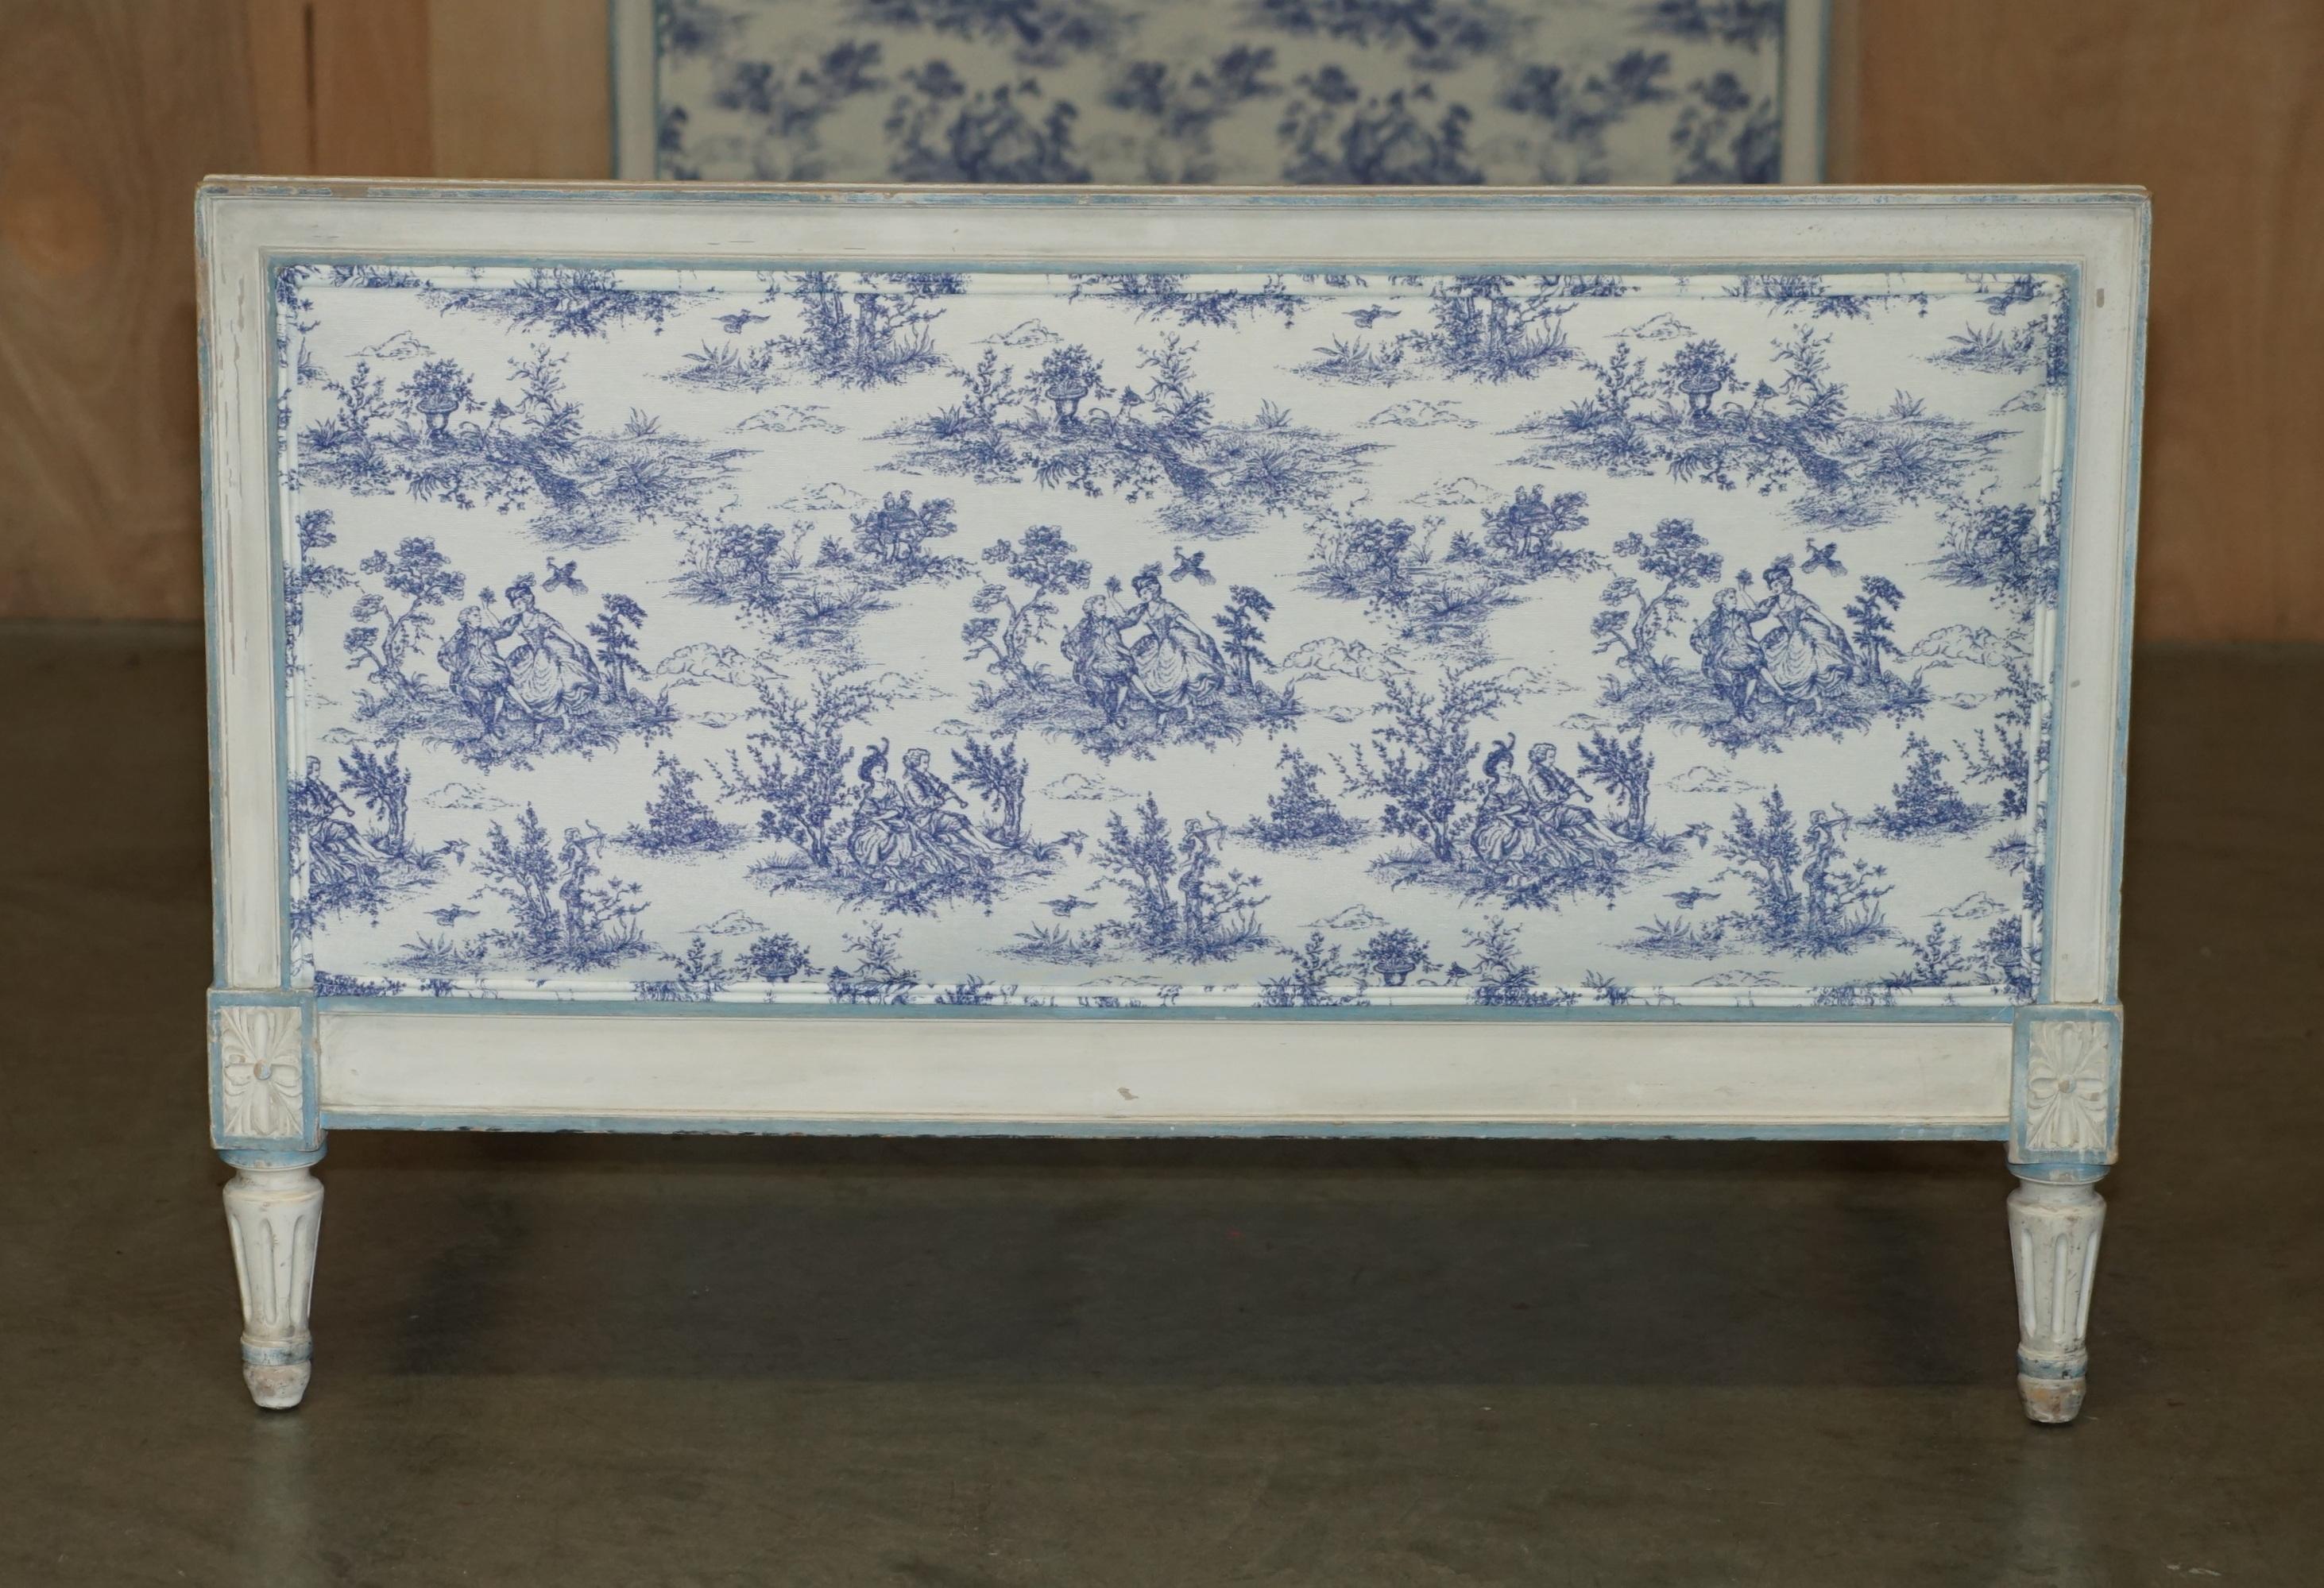 Late 19th Century PAIR OF ANTIQUE FRENCH SiNGLE BEDSTEAD FRAMES WITH TOILE DE JOUY UPHOLSTERY For Sale